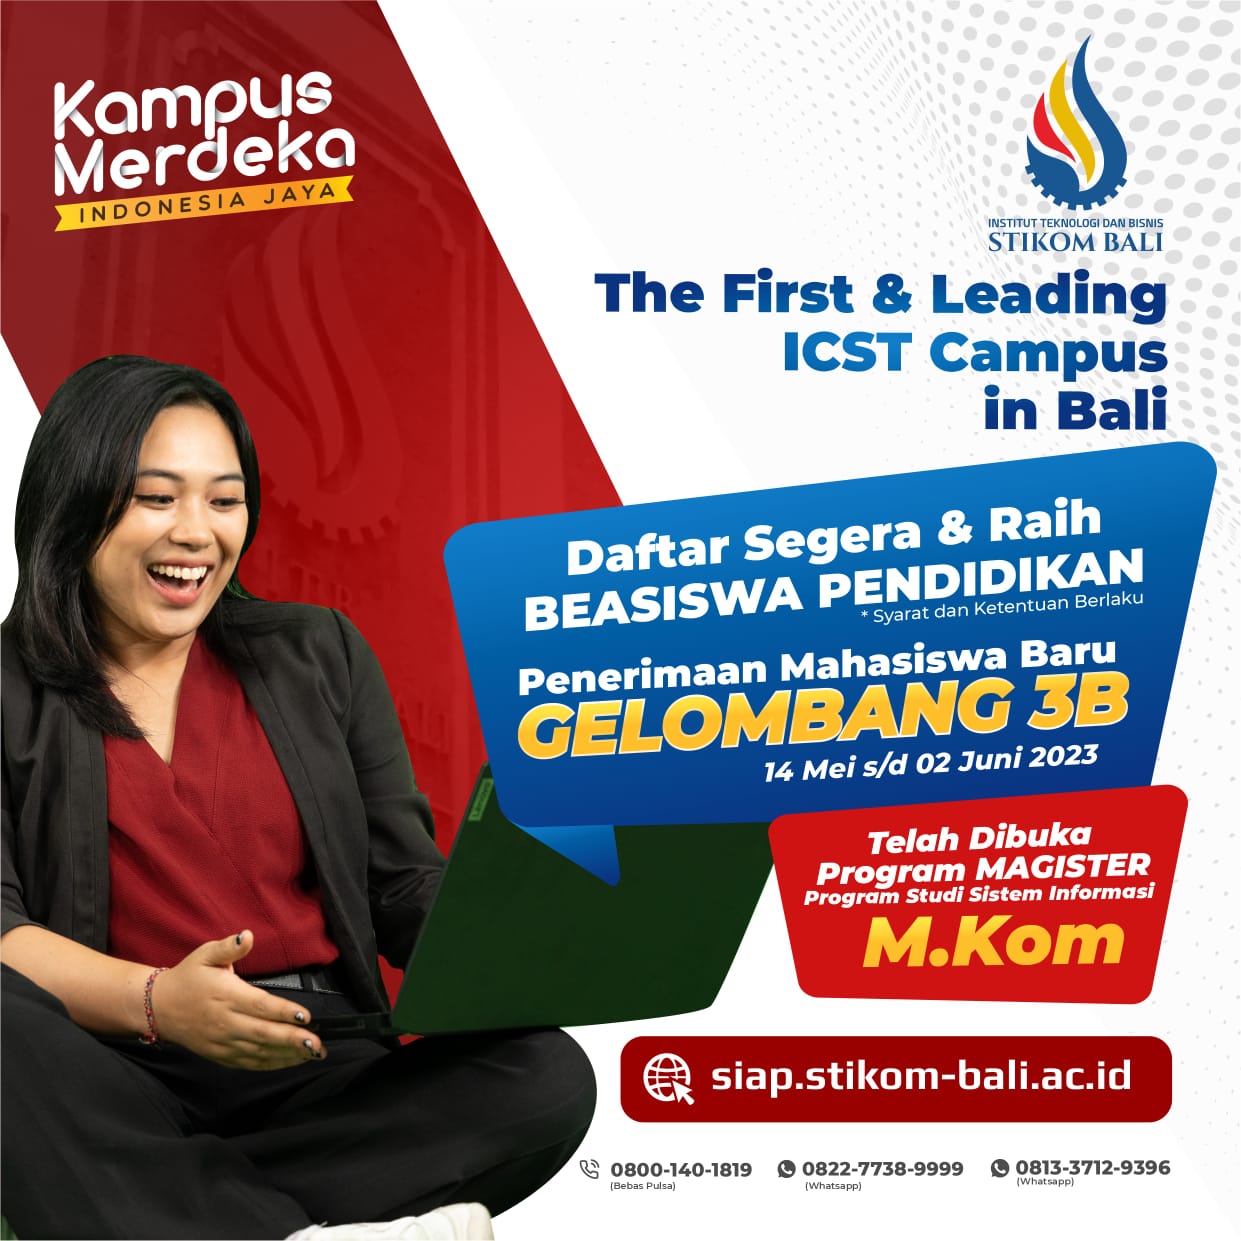 ITB STIKOM BALI - The First & Leading ICST Campus In Bali